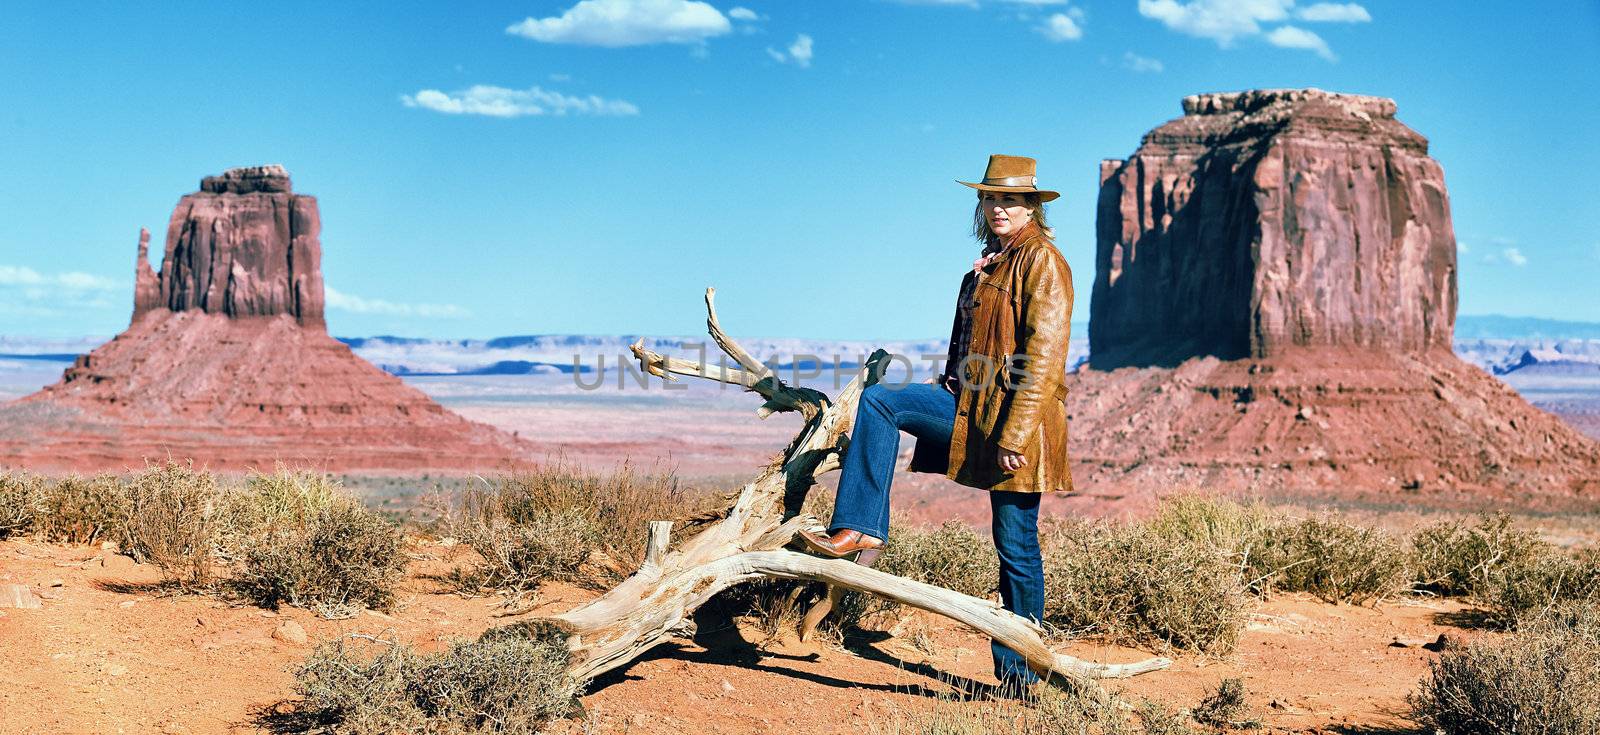 cowgirl at Monument Valley, western movie style